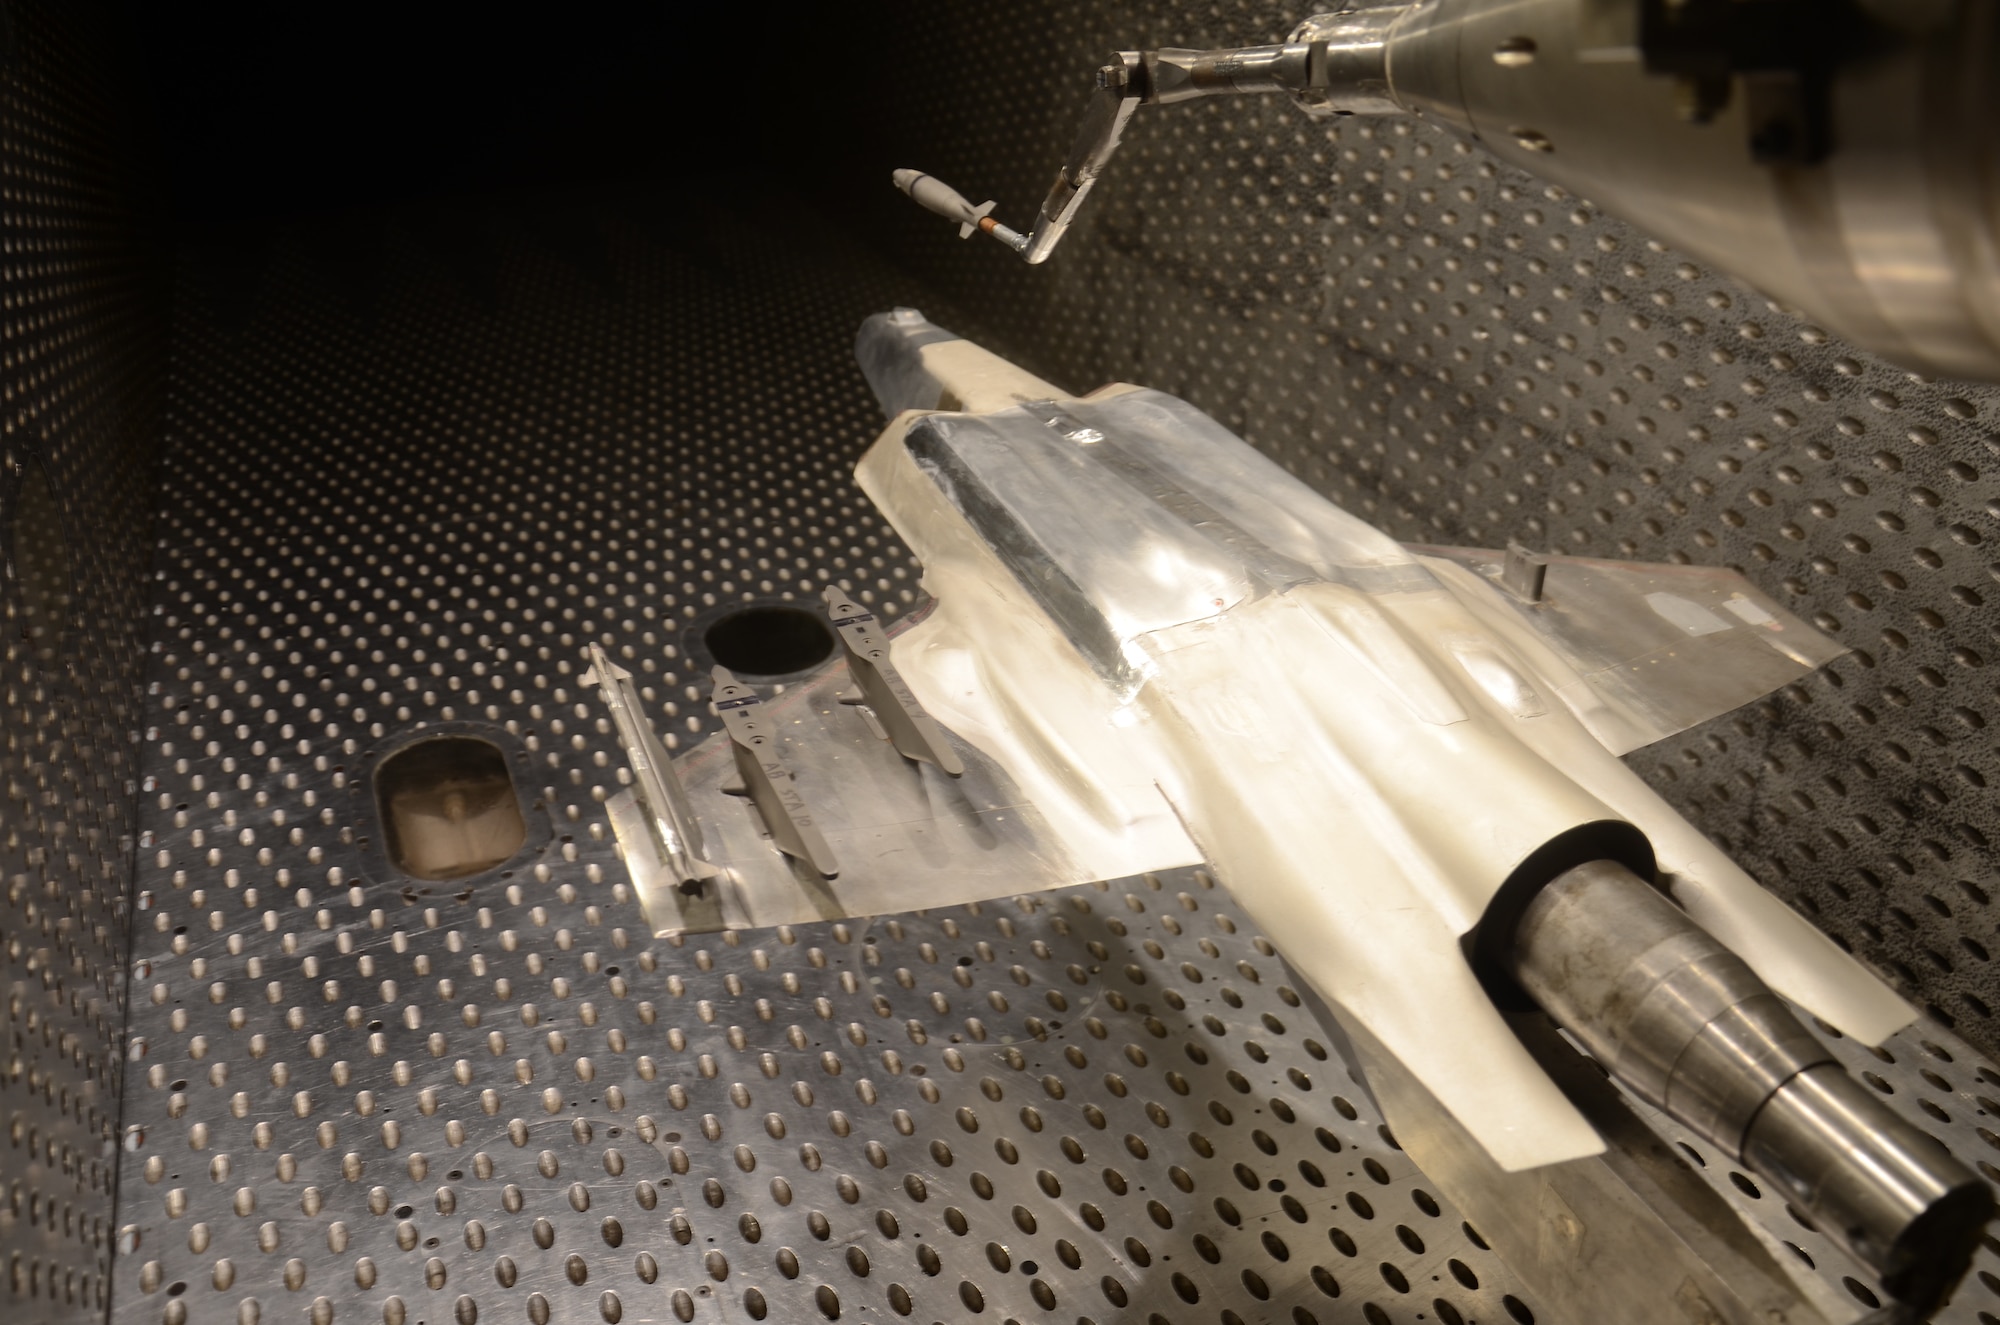 A 1/15th scale model of an F-35 Lightning II Joint Strike Fighter undergoes store separation testing in the Arnold Engineering Development Complex 4-foot transonic wind tunnel, known as 4T, at Arnold Air Force Base. (U.S. Air Force photo)